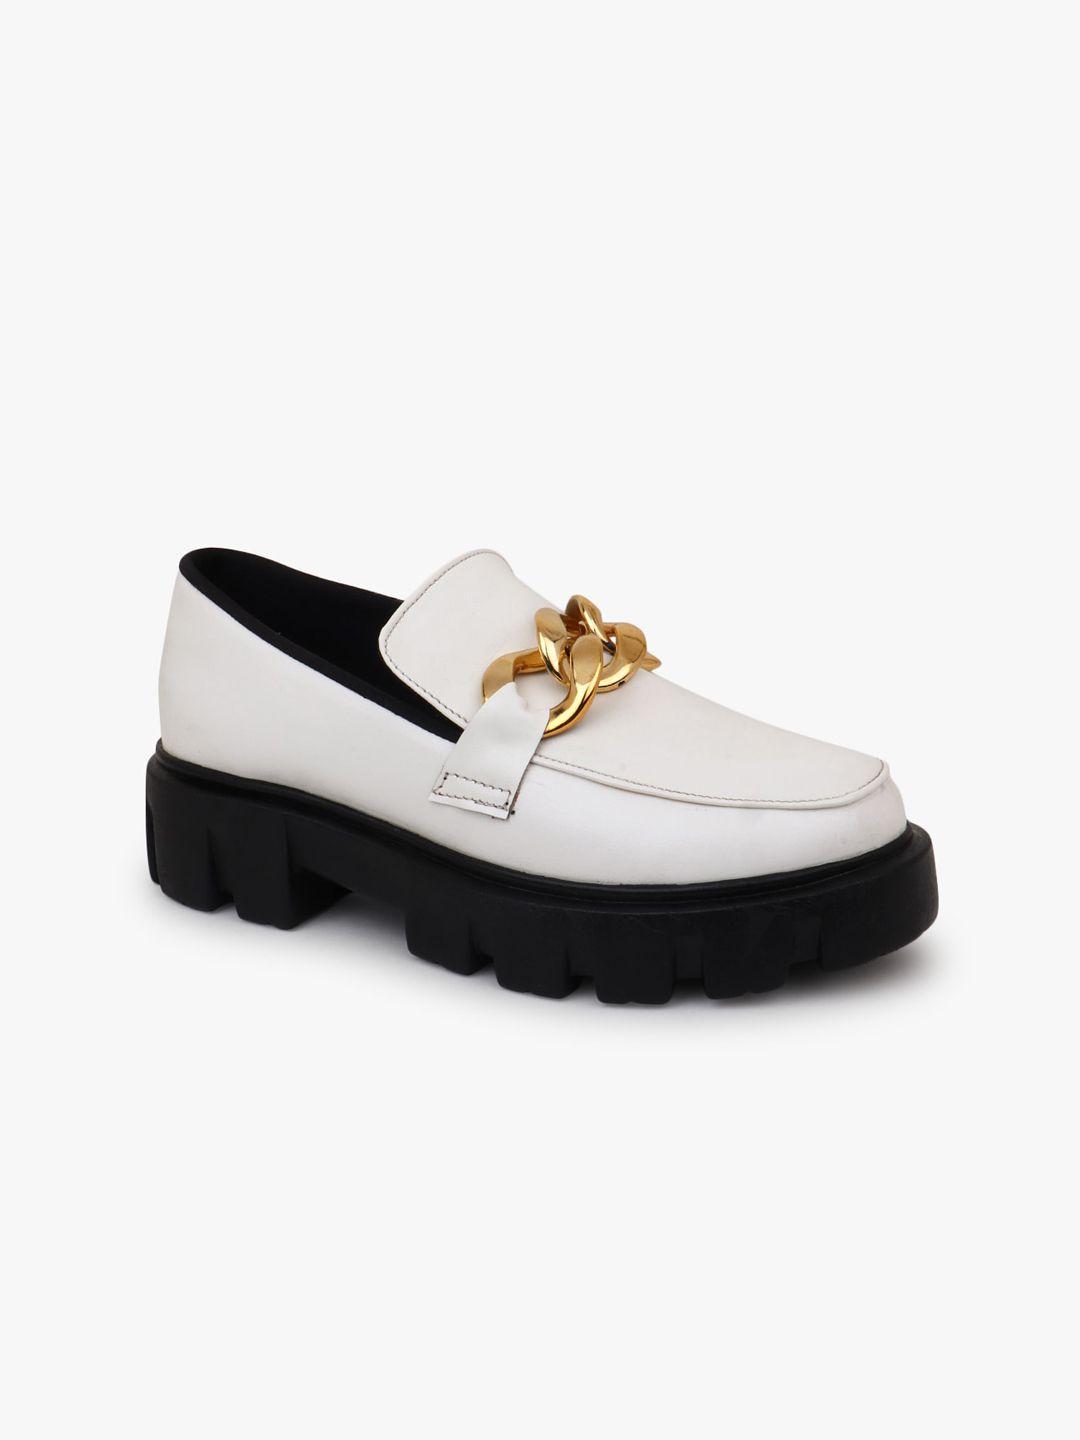 the roadster lifestyle co. women white buckled heeled contrast sole loafers